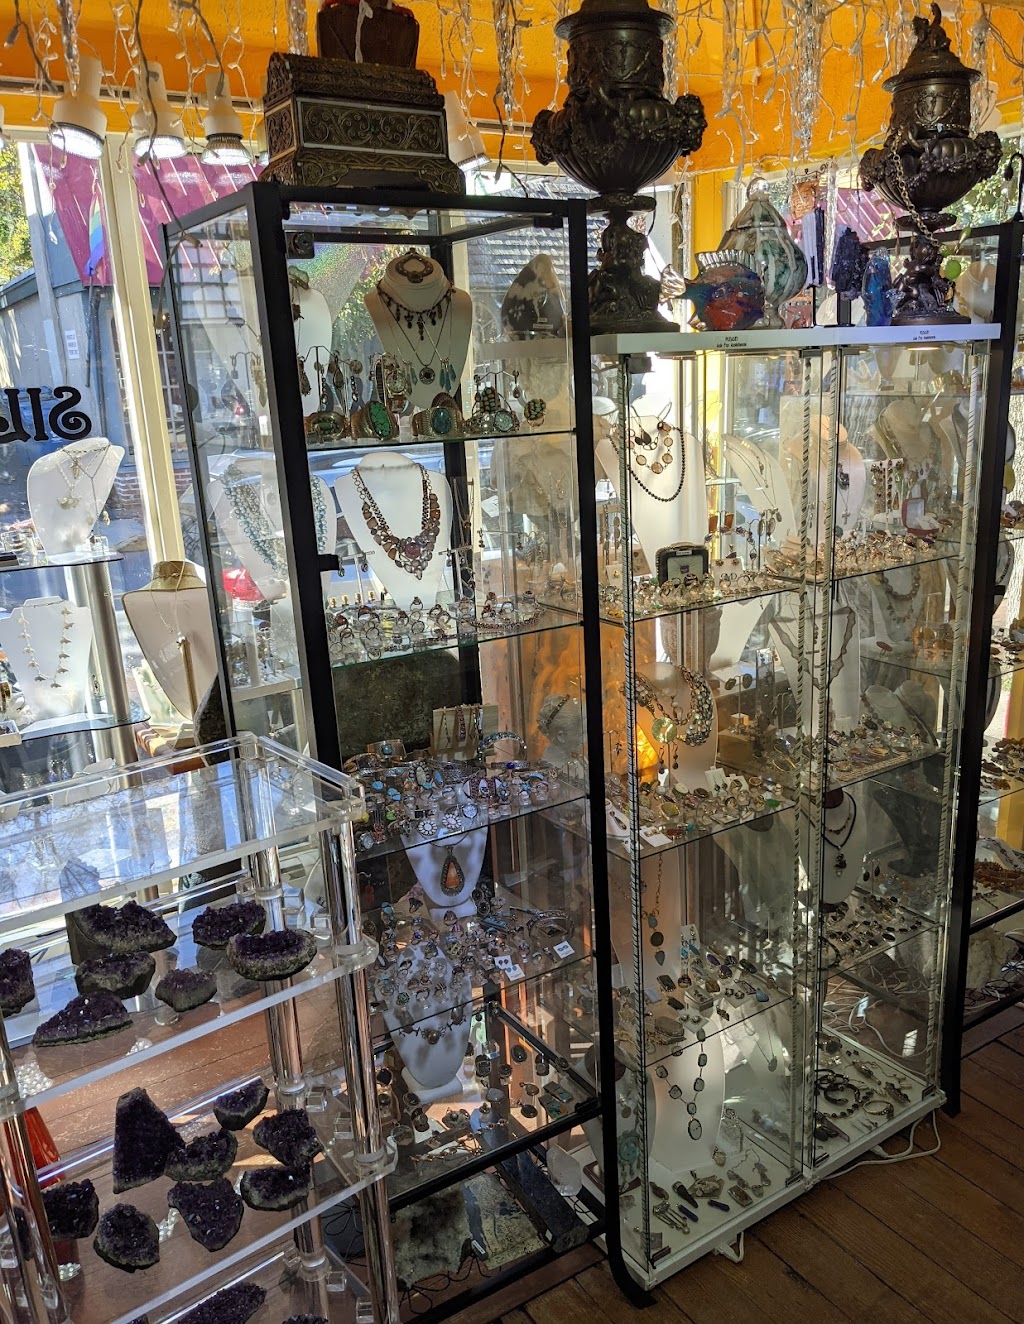 Exquisite Earth | 126 S Main St, New Hope, PA 18938 | Phone: (215) 862-2130